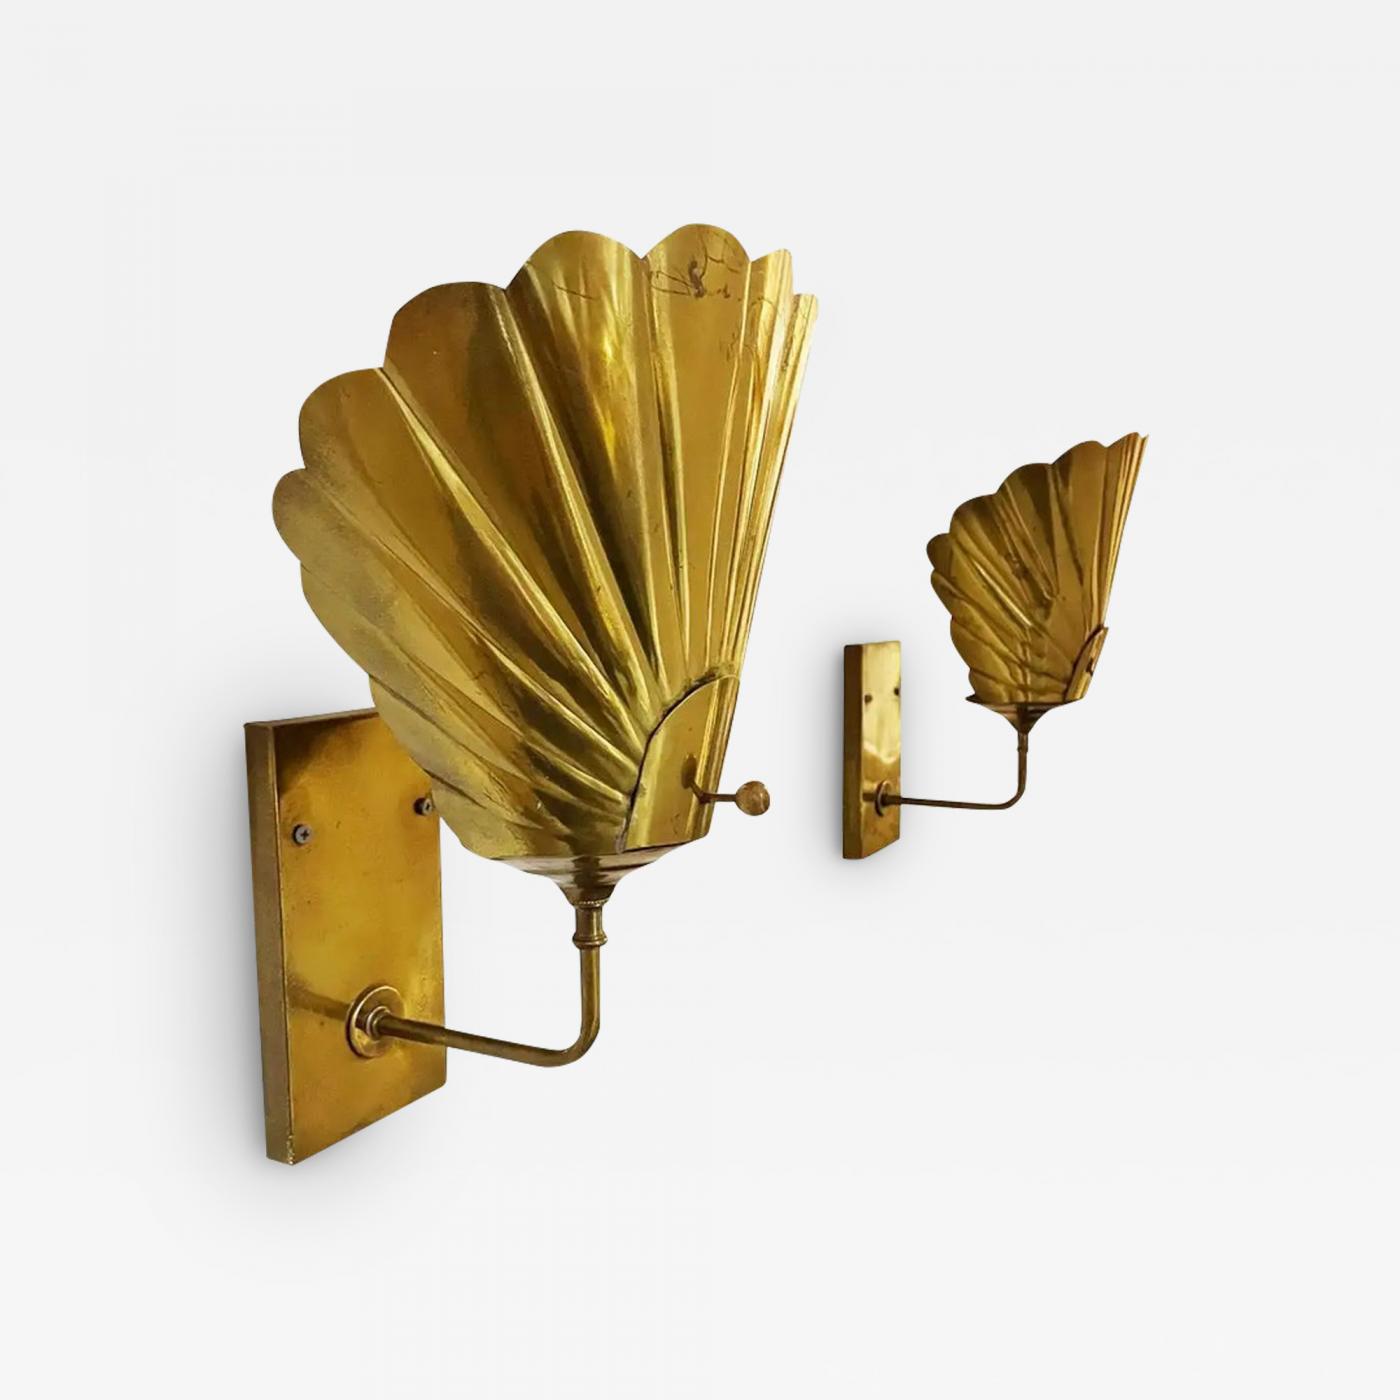 https://cdn.incollect.com/sites/default/files/zoom/Pair-Vintage-MidCentury-Italian-Modern-Wall-Sconces-Lights-in-Patinated-Brass-626905-2996554.jpg